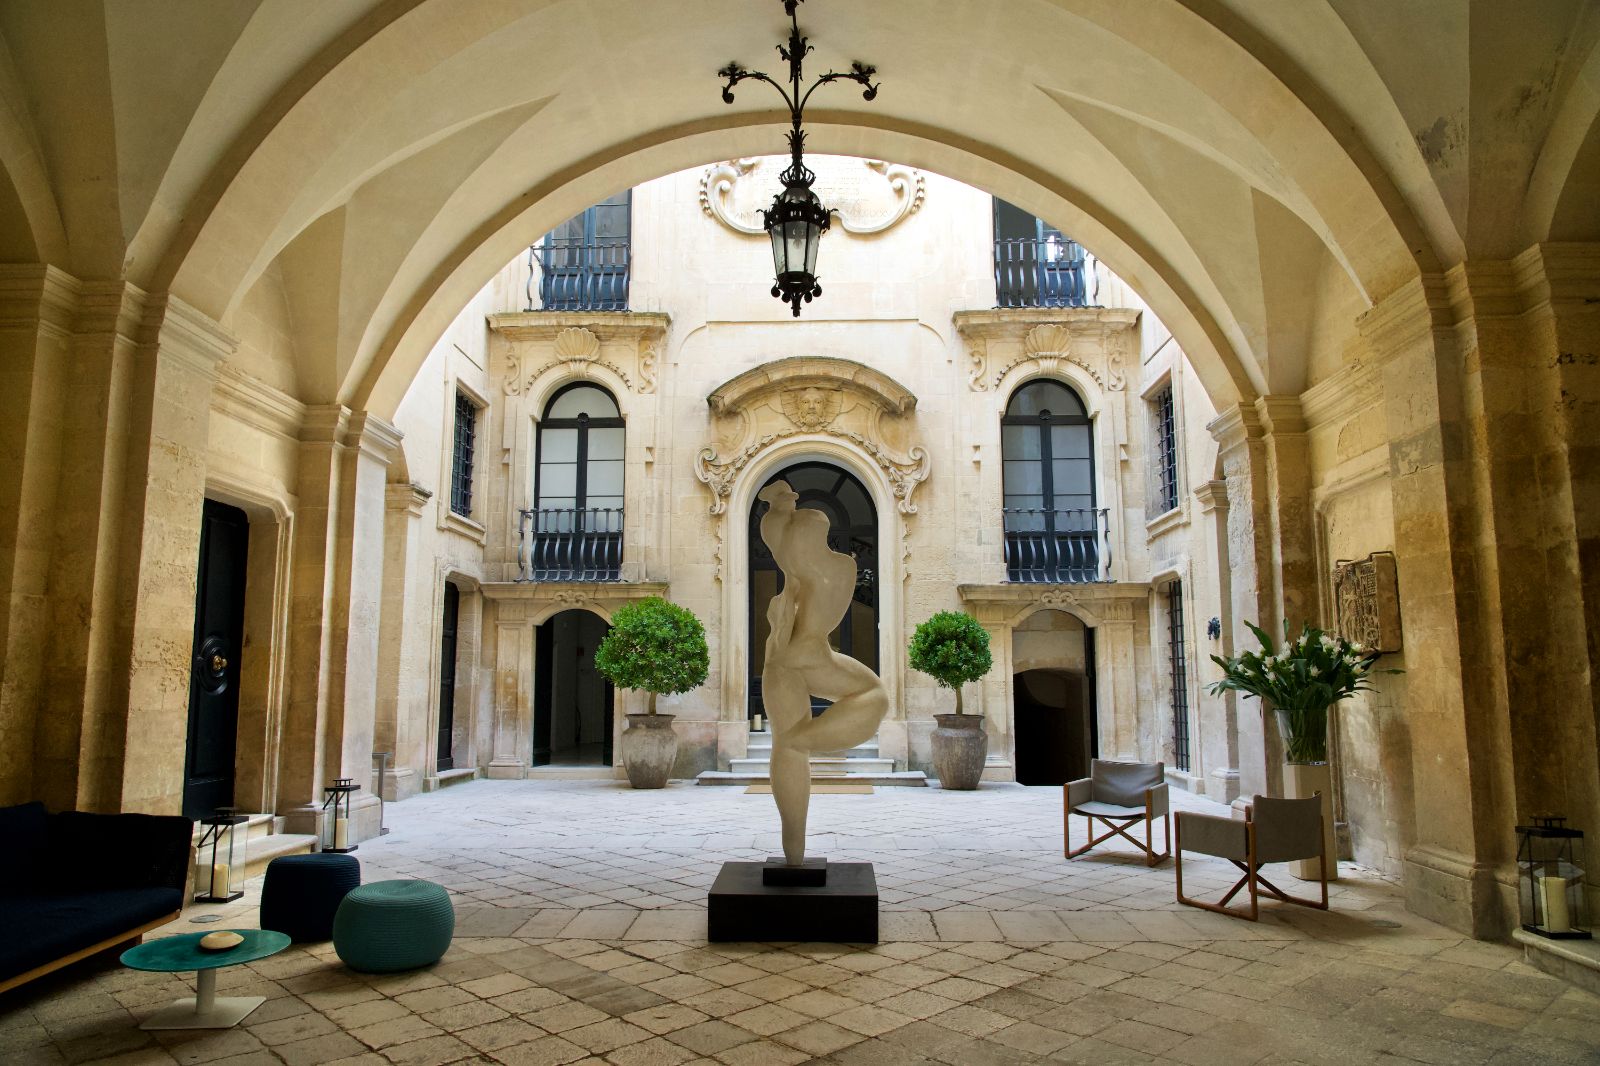 White marble sculpture in the courtyard of luxury hotel Palazzo Bozzi Corso in Lecce, Italy